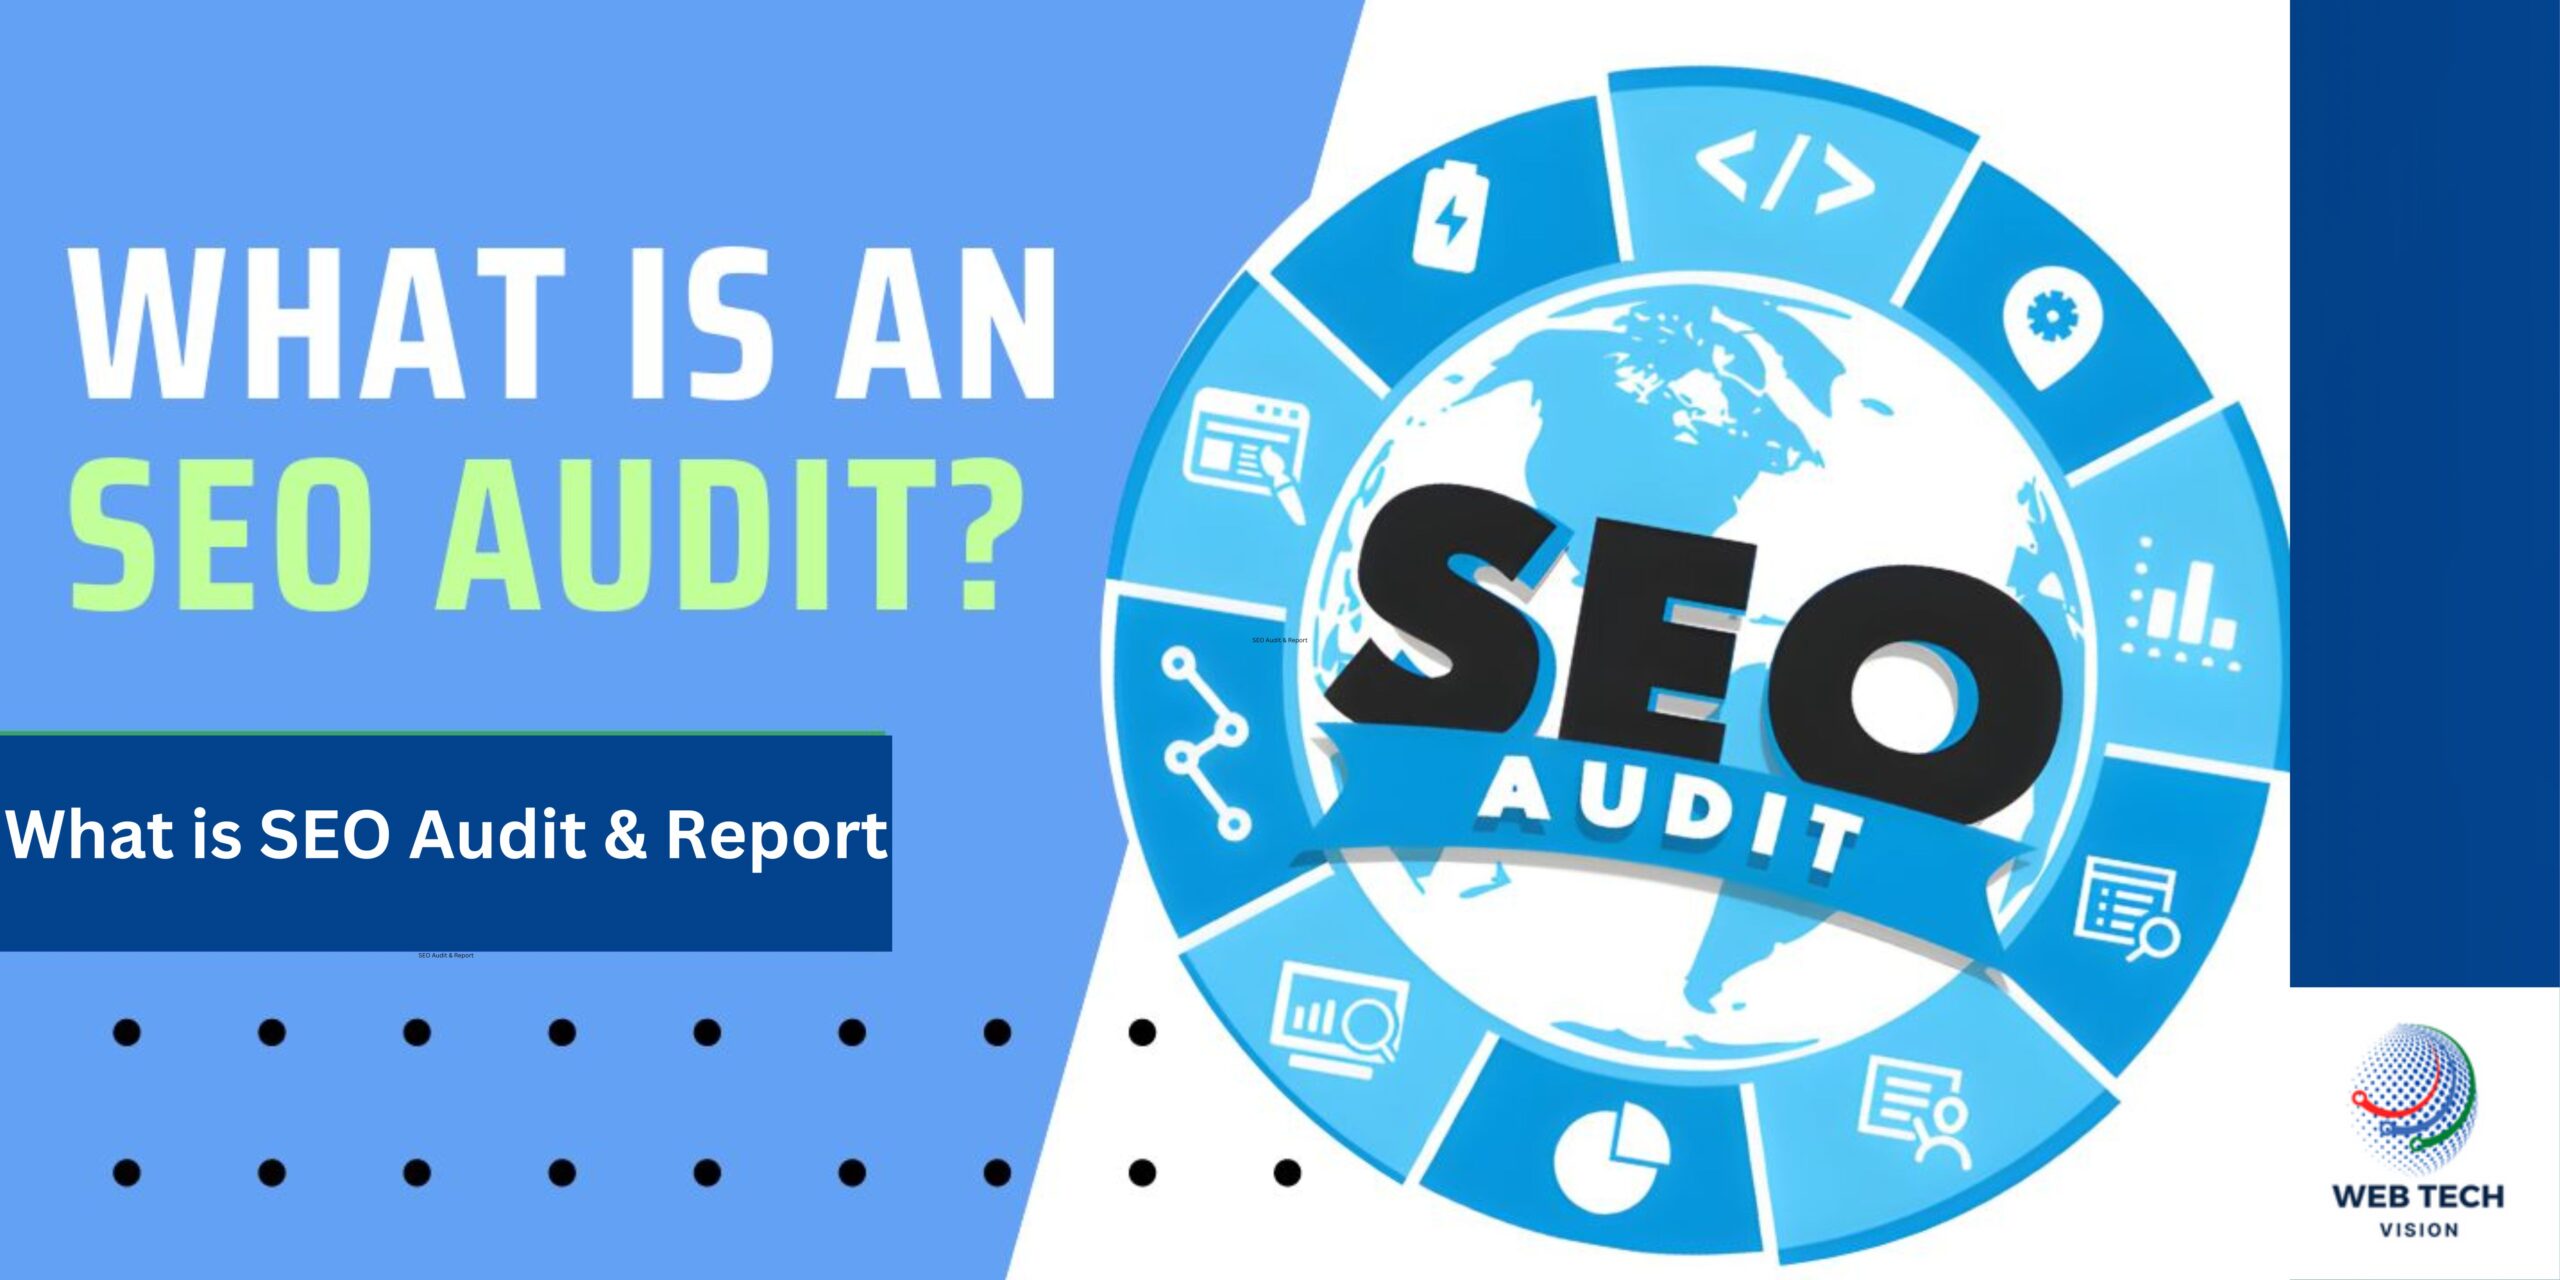 What is SEO Audit & Report?